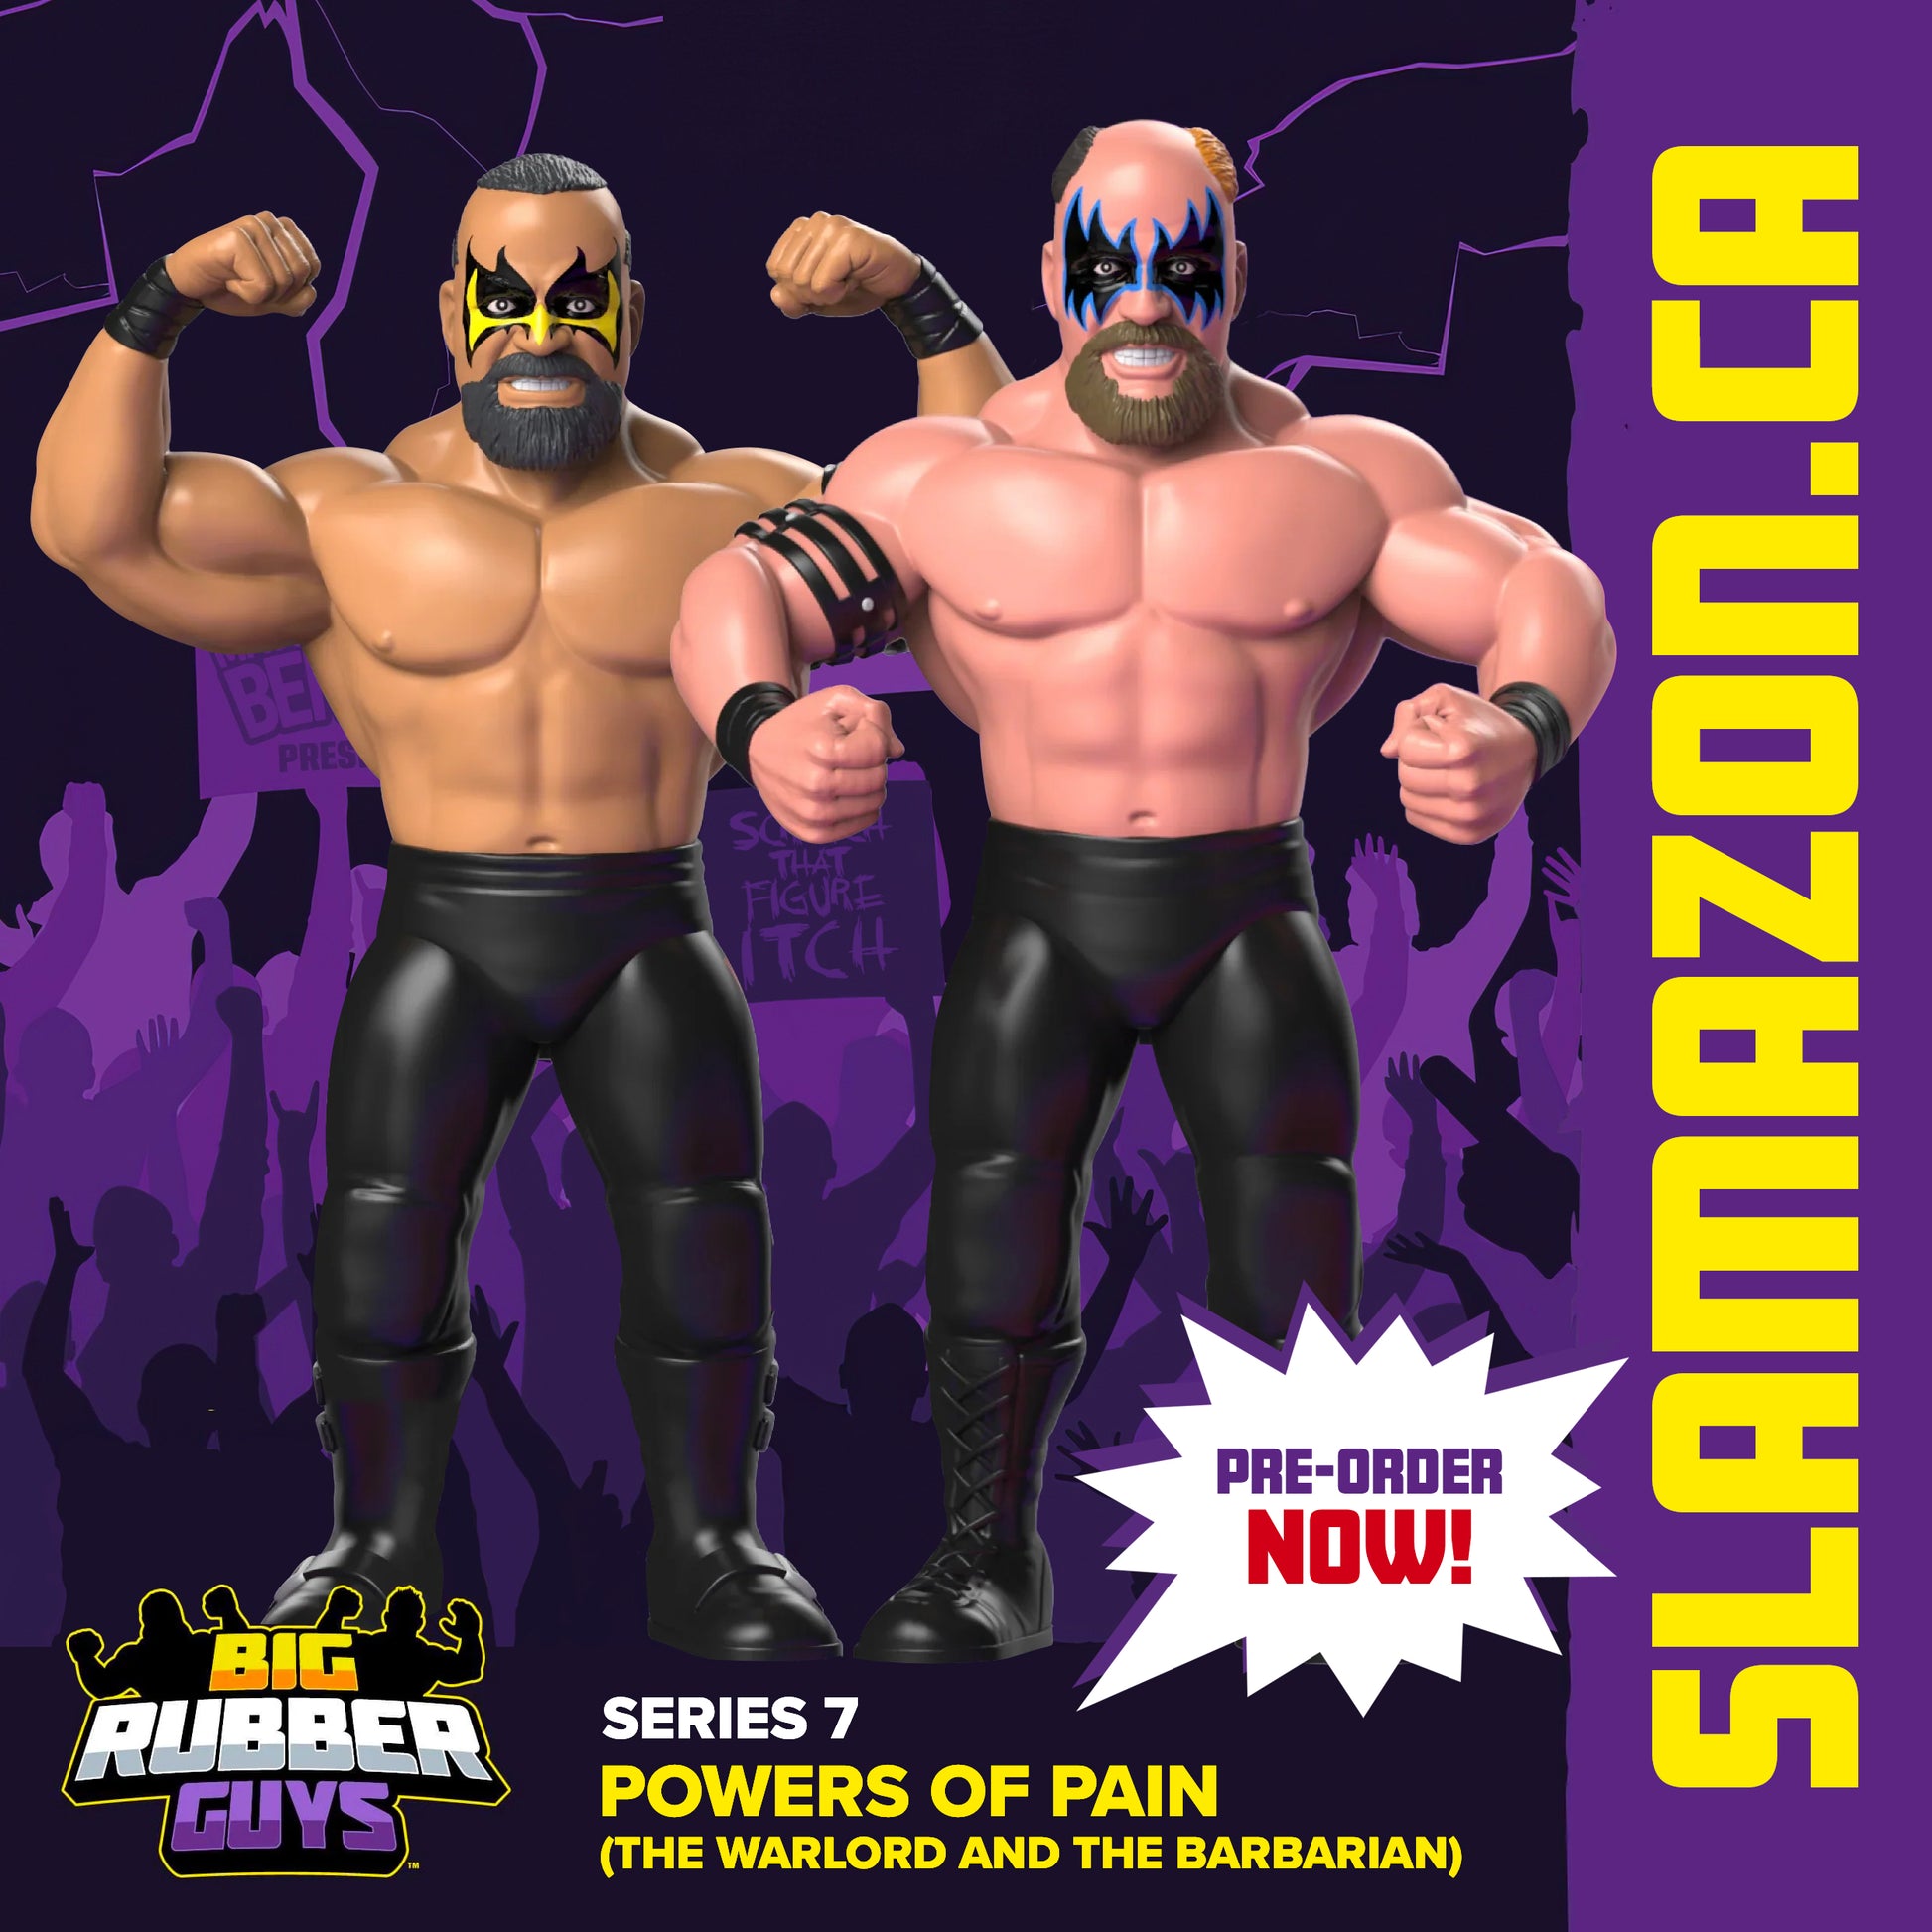 Big Rubber Guys Series 7 Powers of Pain Warlord and Barbarian available at www.slamazon.ca